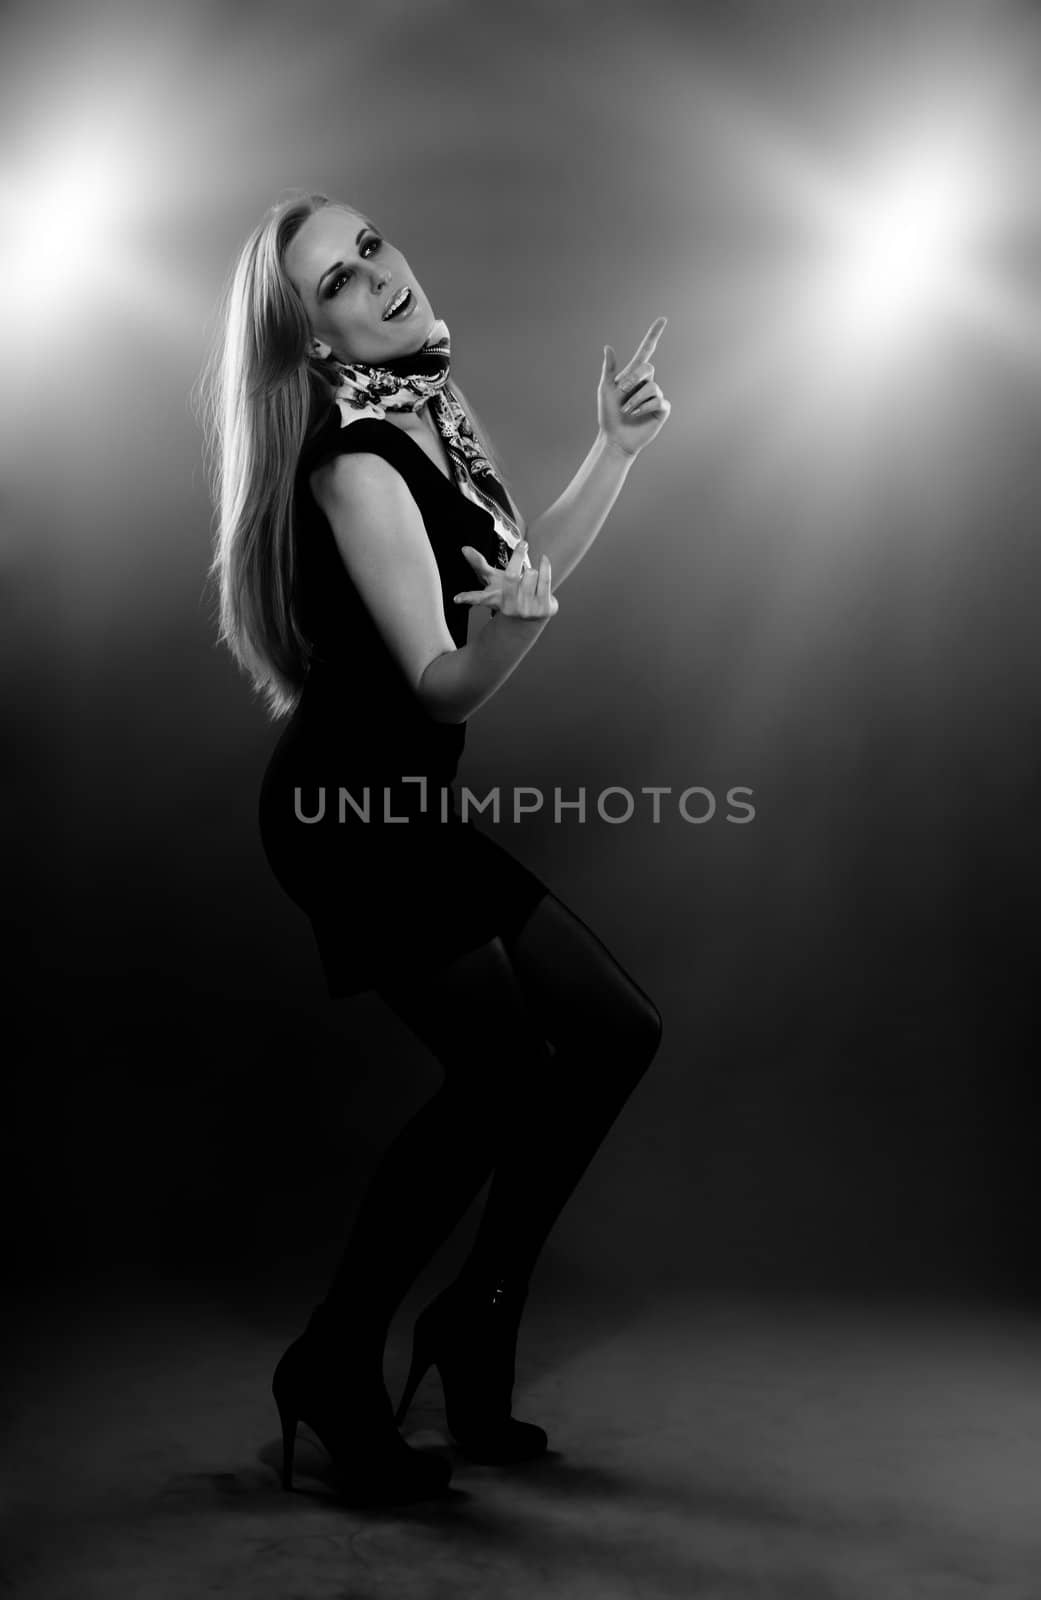 Smiling lady in the modern dress performing disco dance indoors with backlight and illumination. Black and white photo